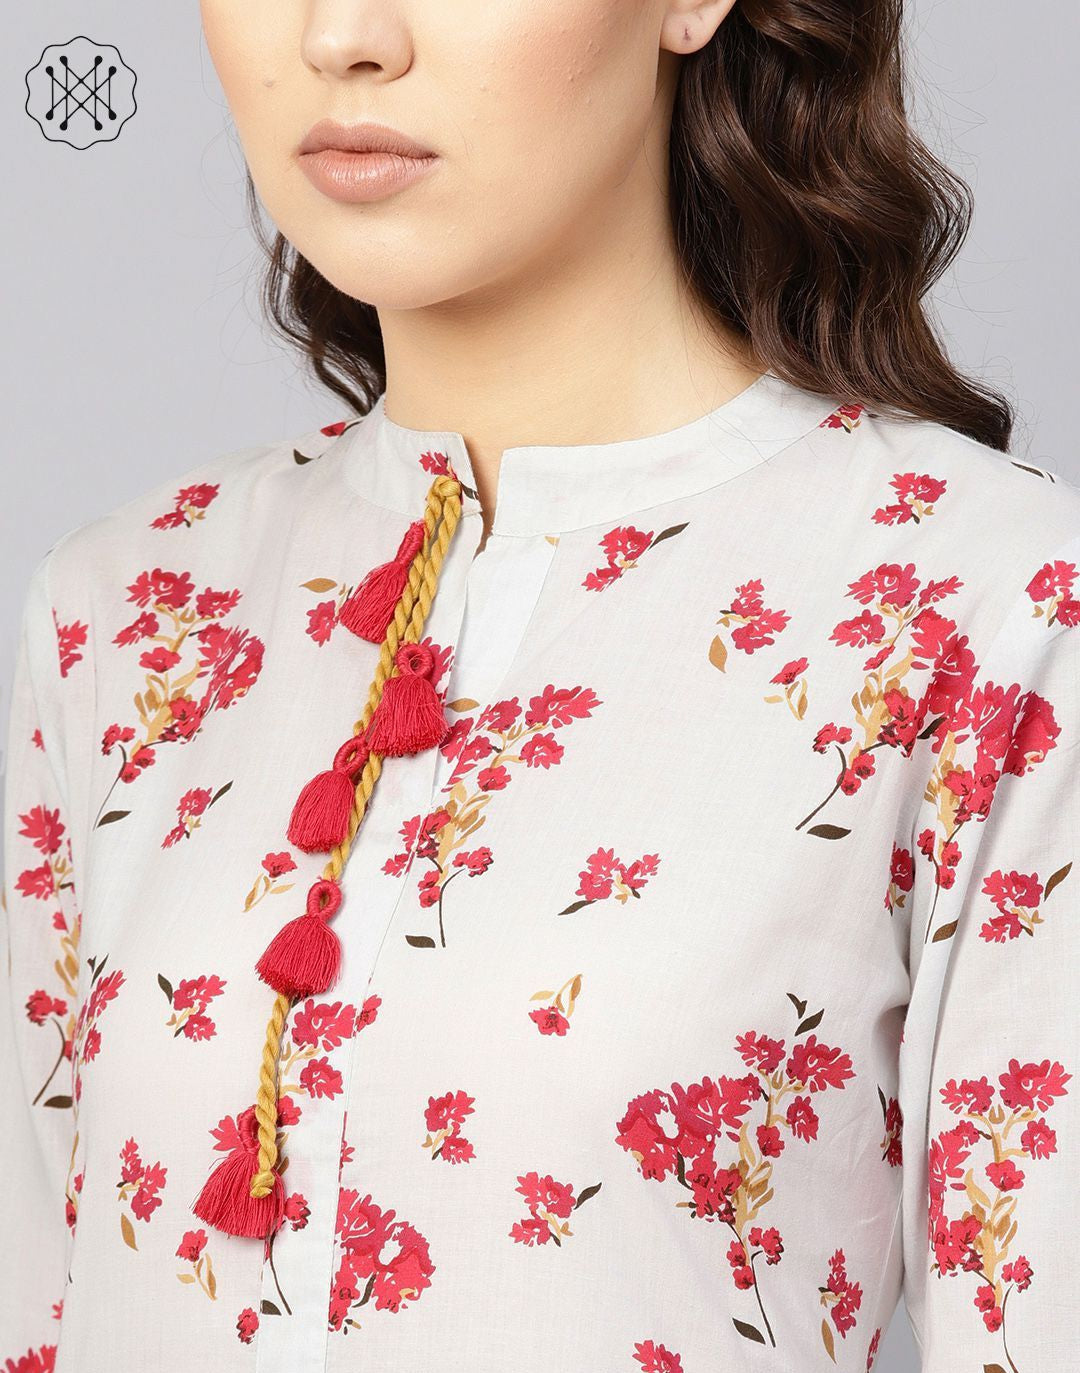 Ice Blue And Pink Floral Printed Collared 3/4Th Sleeves Straight Kurta With Front Tassel Detailing